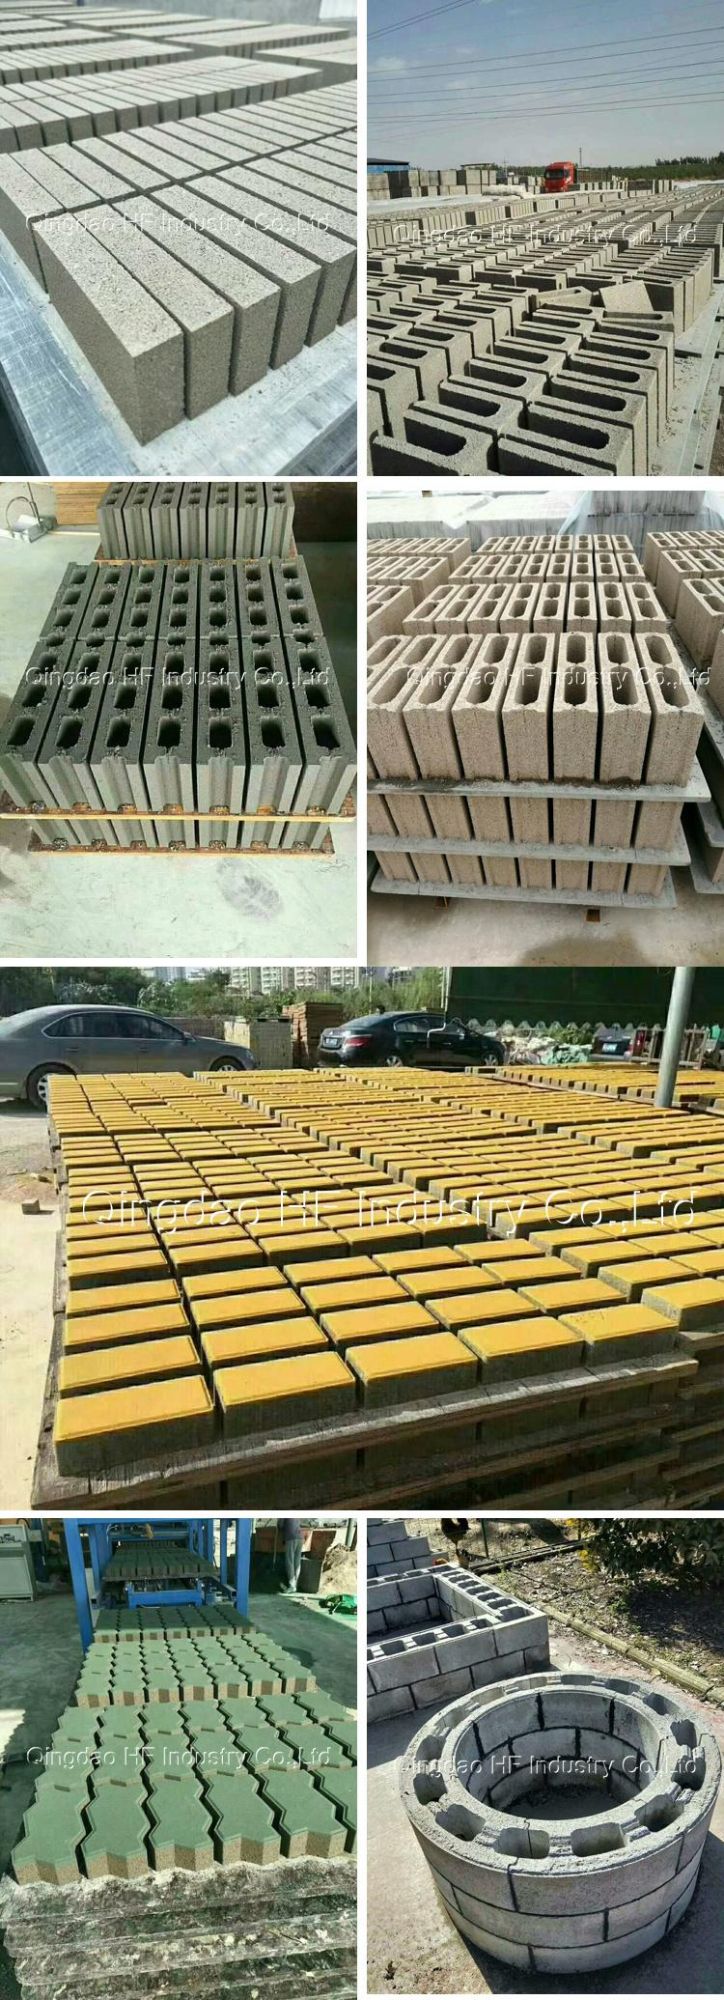 Hydraulic Concrete Hollow Block Cement Paver Curbstone Making Machine Line in Factory